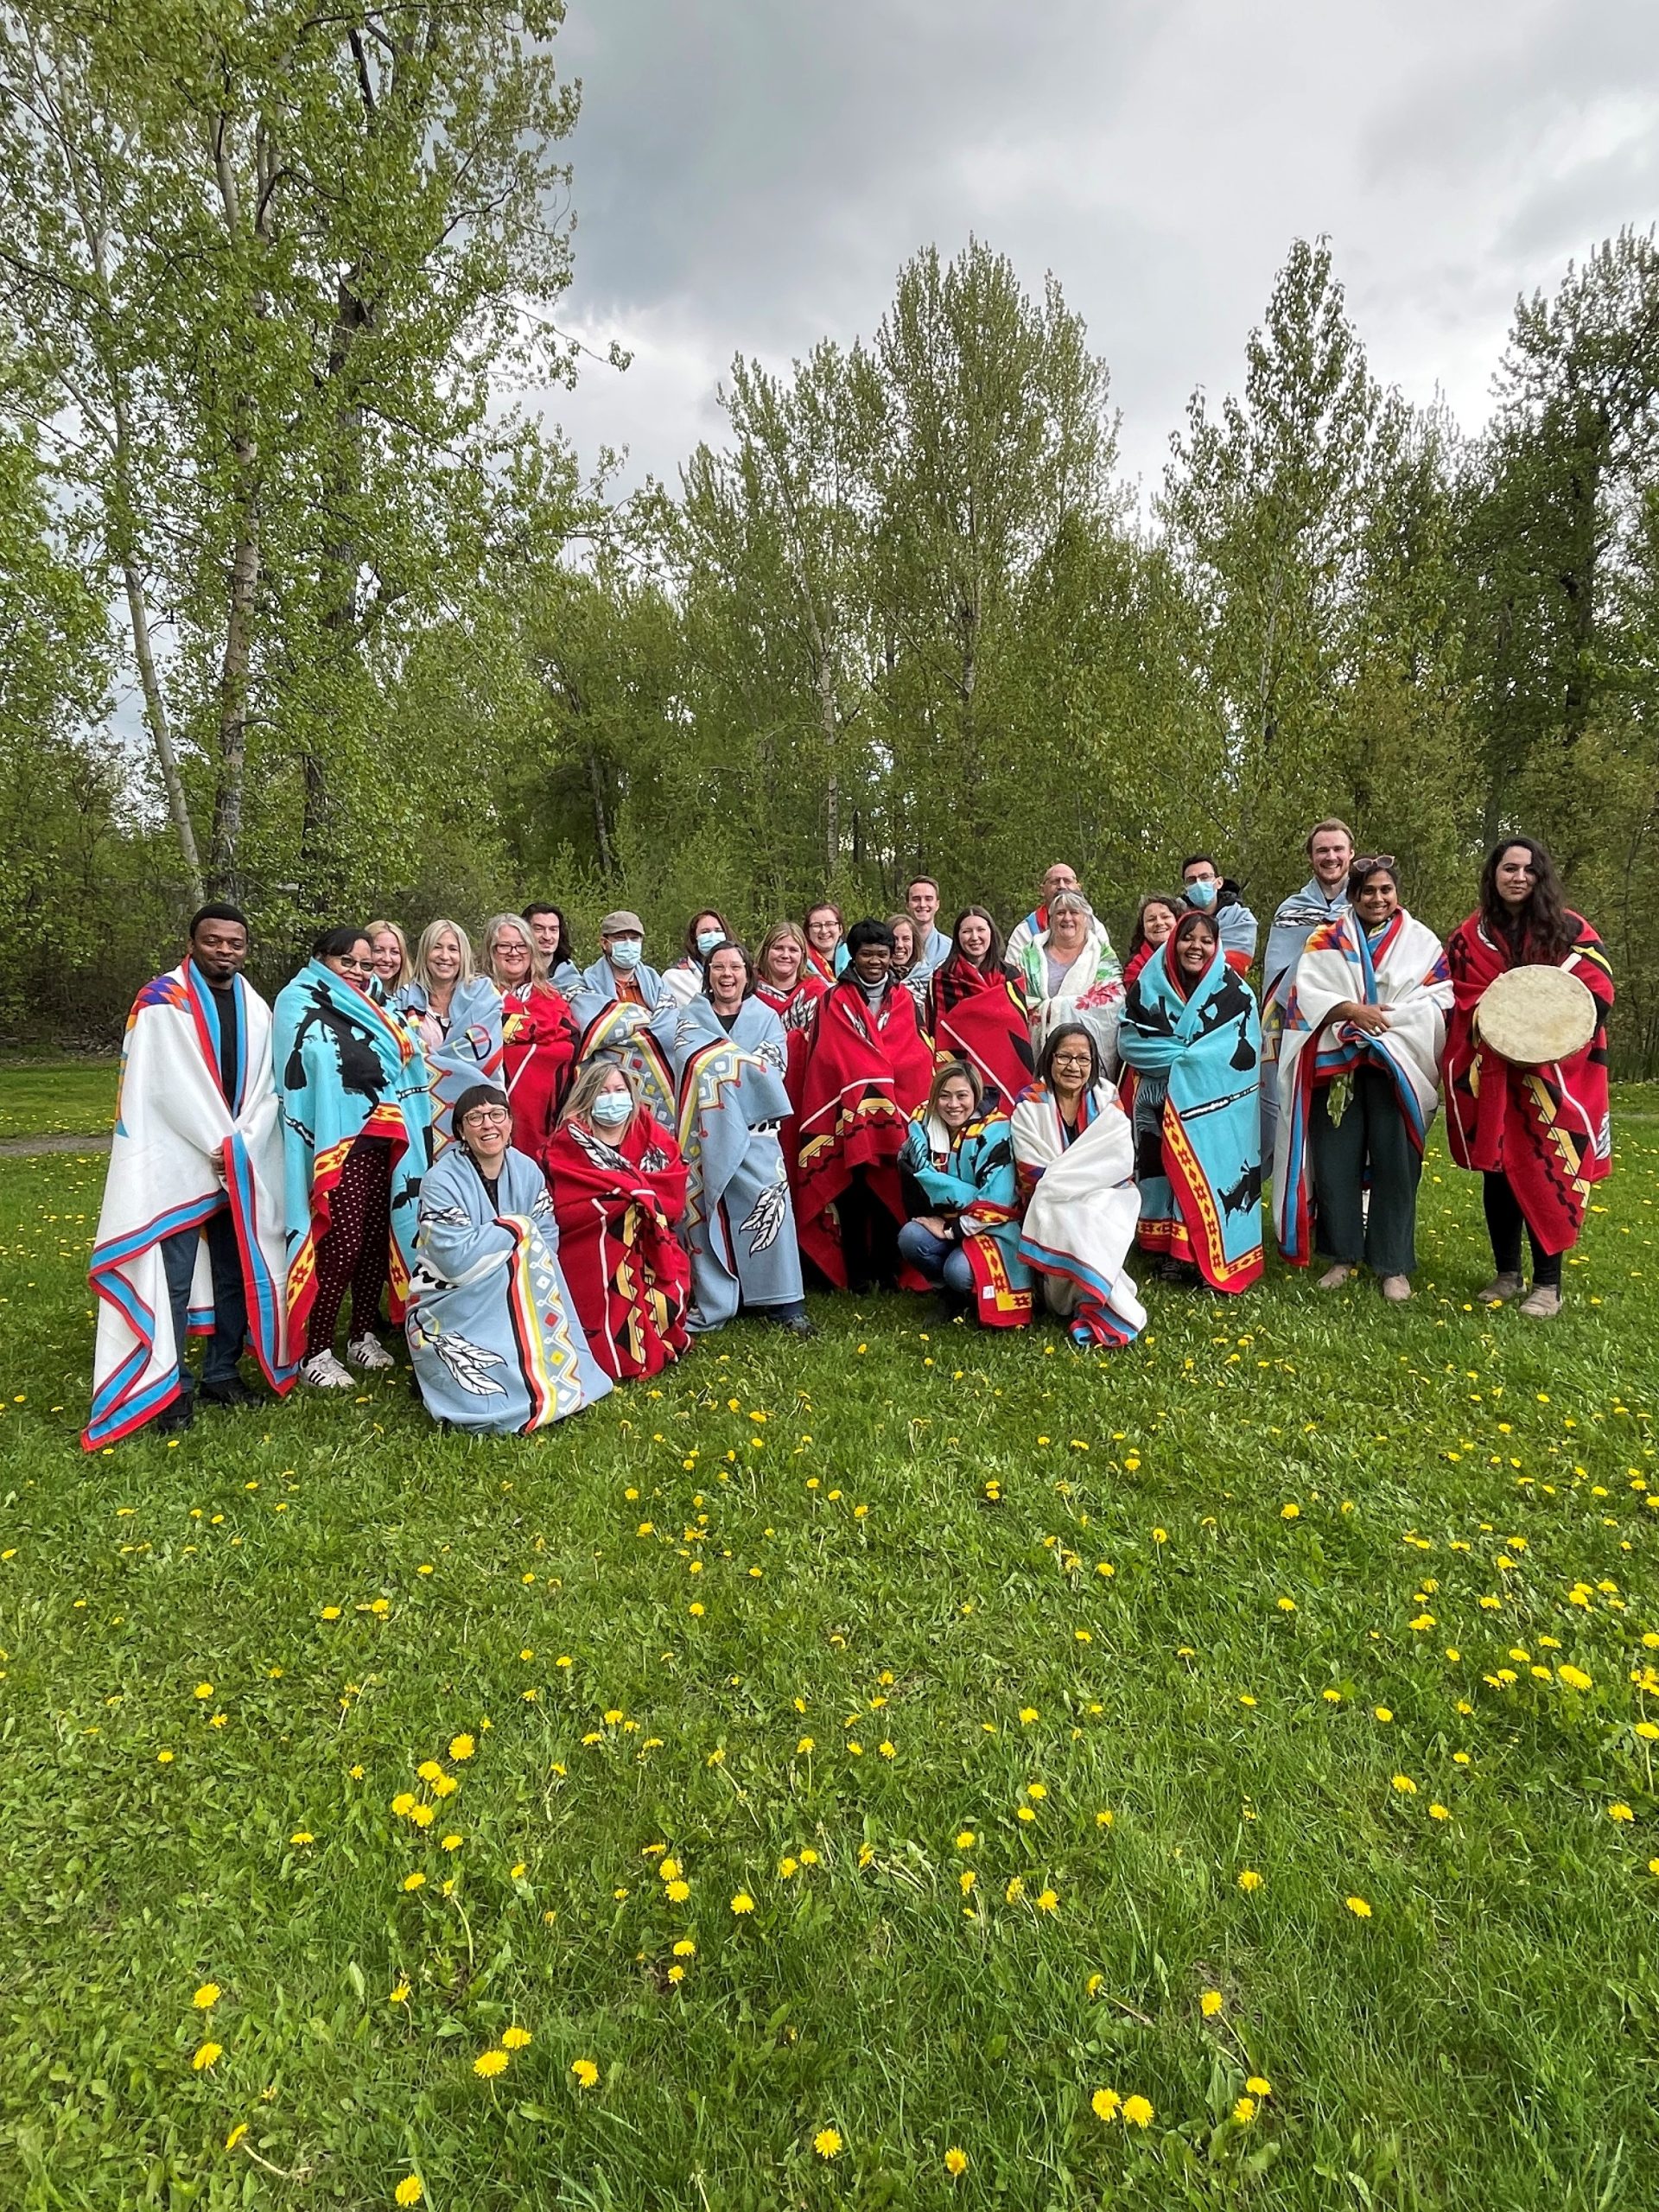 A group of people stand in a flower-dotted field wearing colourful blankets and holding drums.